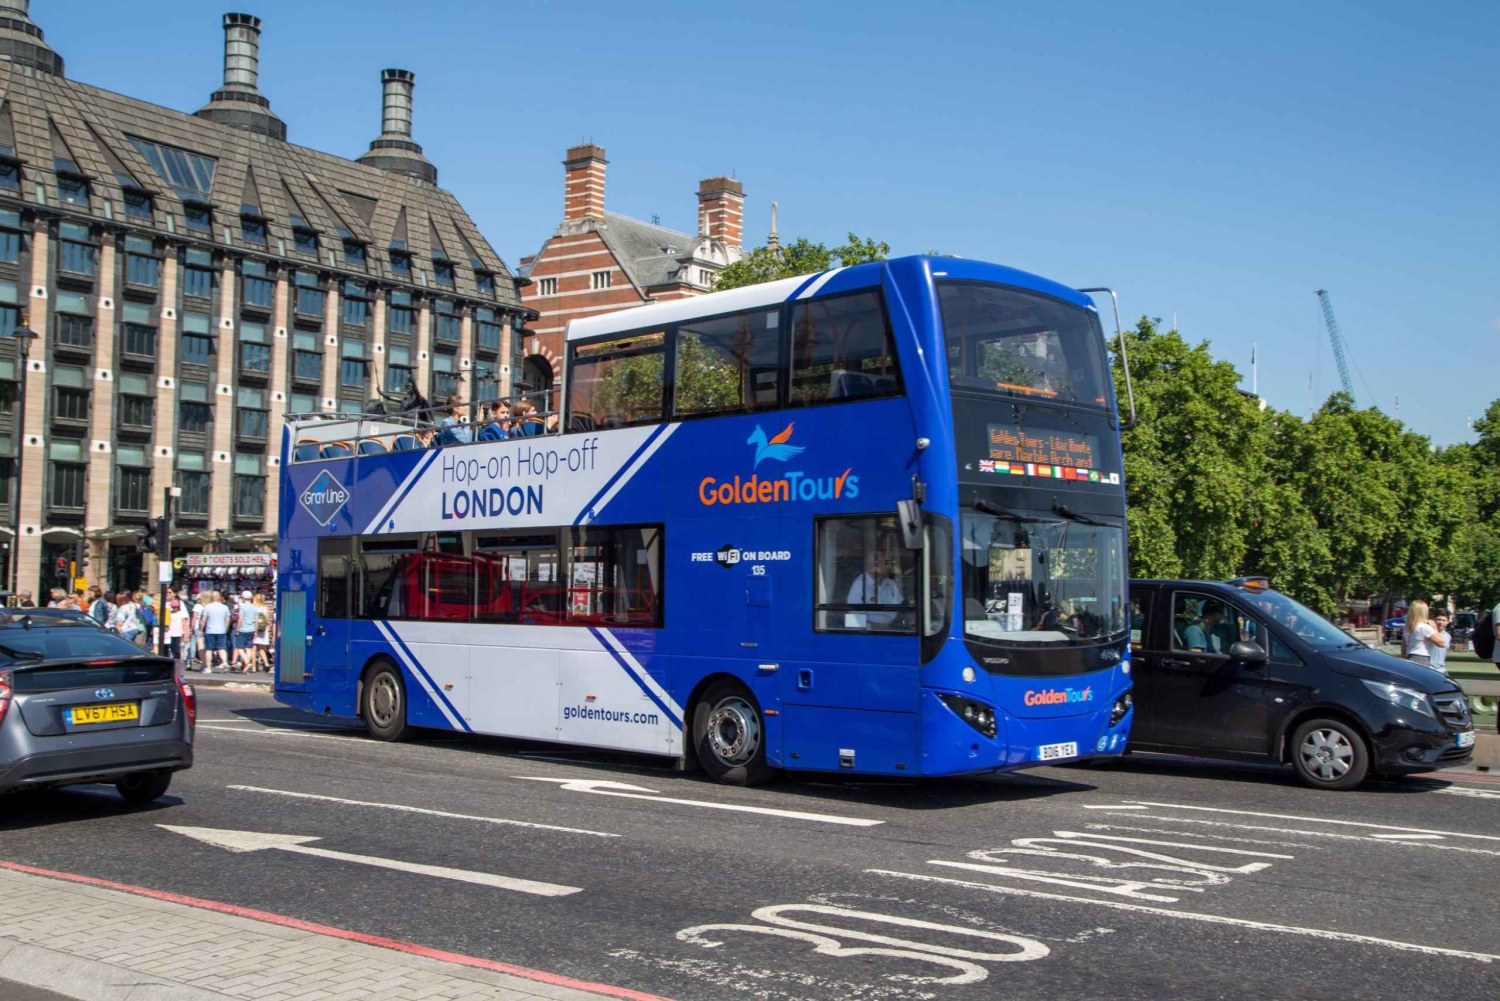 Londyn: Golden Tours Open-Top Hop-on Hop-off Sightseeing Bus